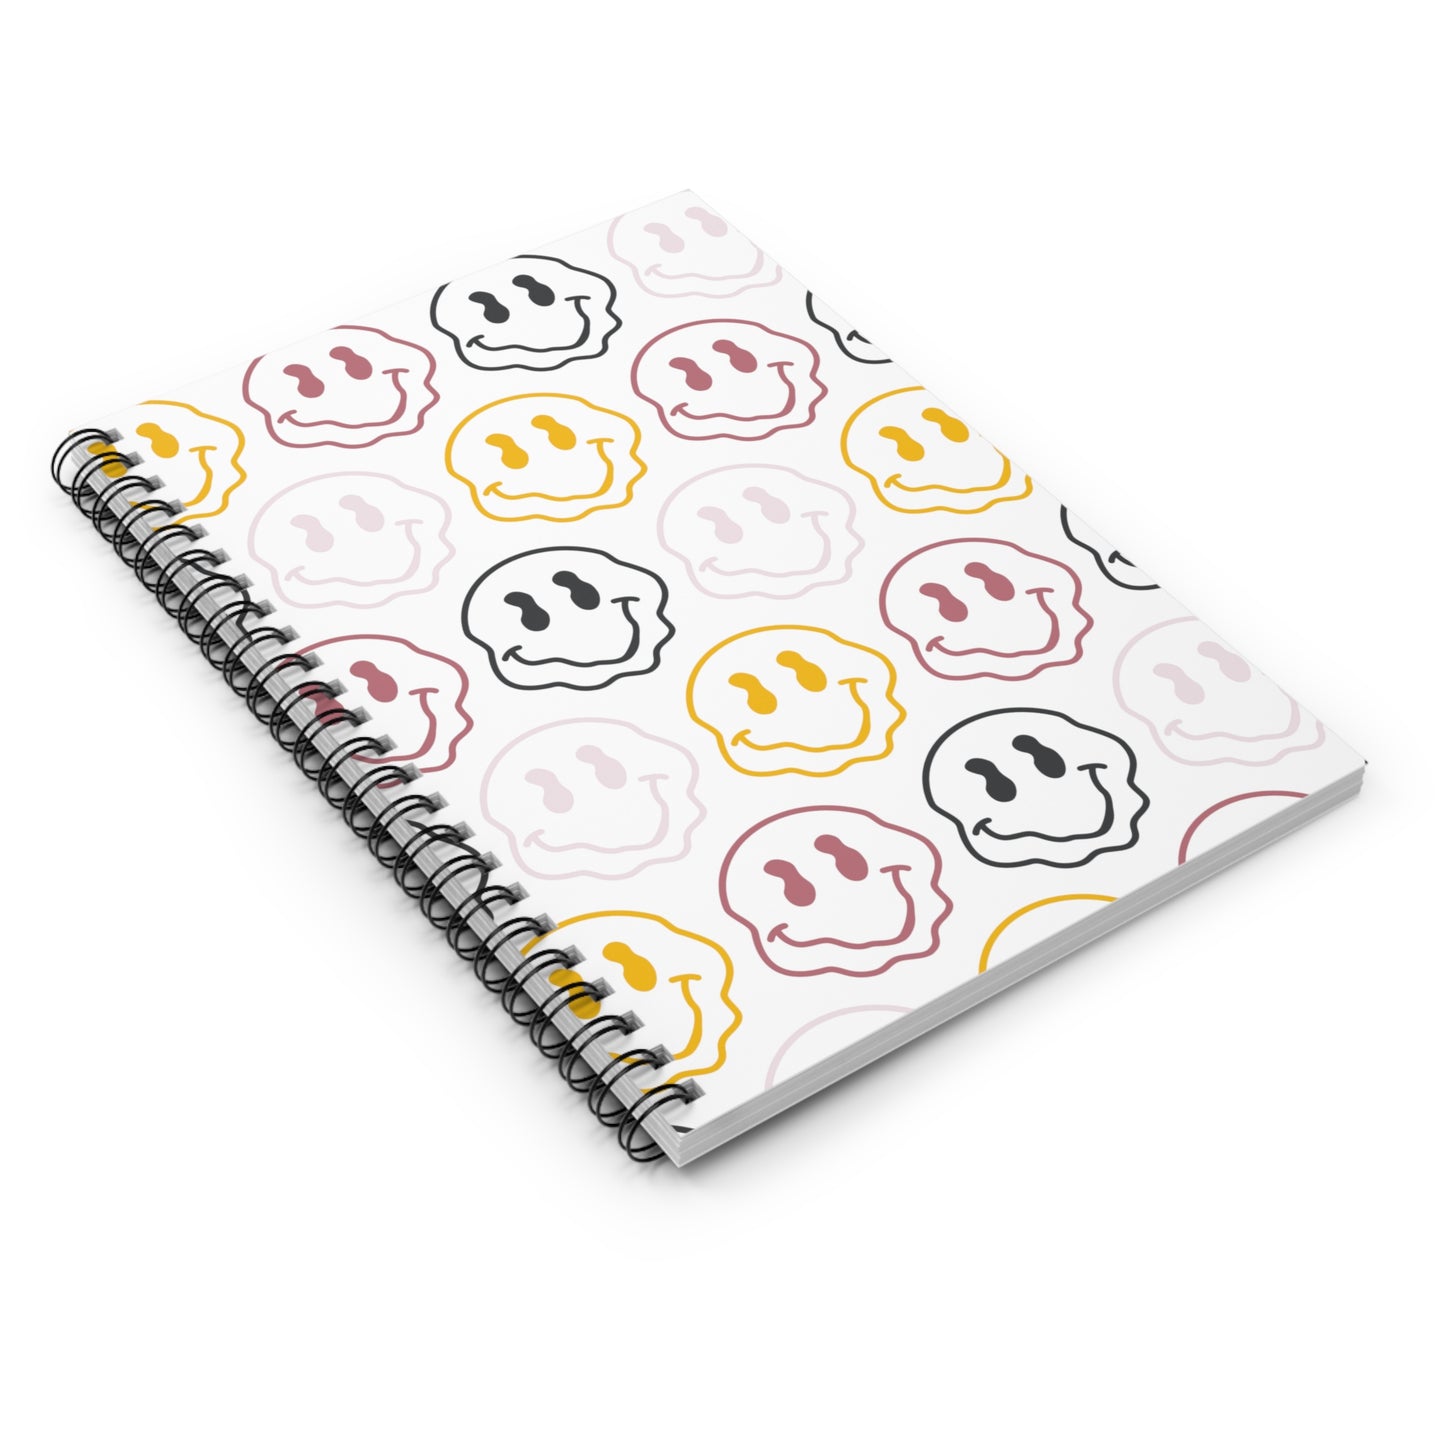 Distorted Smiley Face Spiral Notebook - Ruled Line